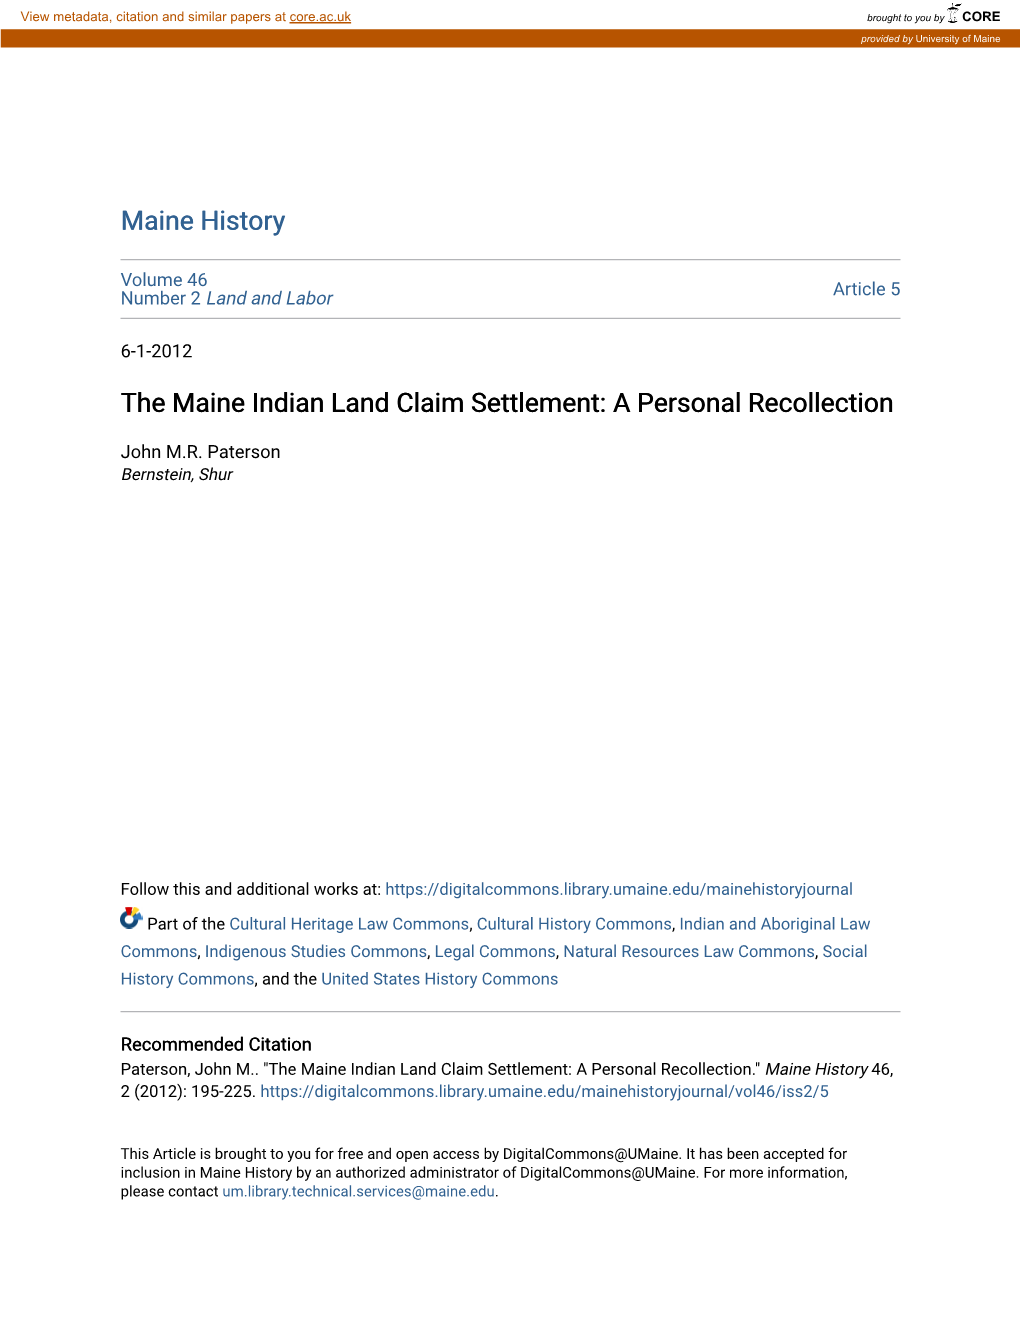 The Maine Indian Land Claim Settlement: a Personal Recollection